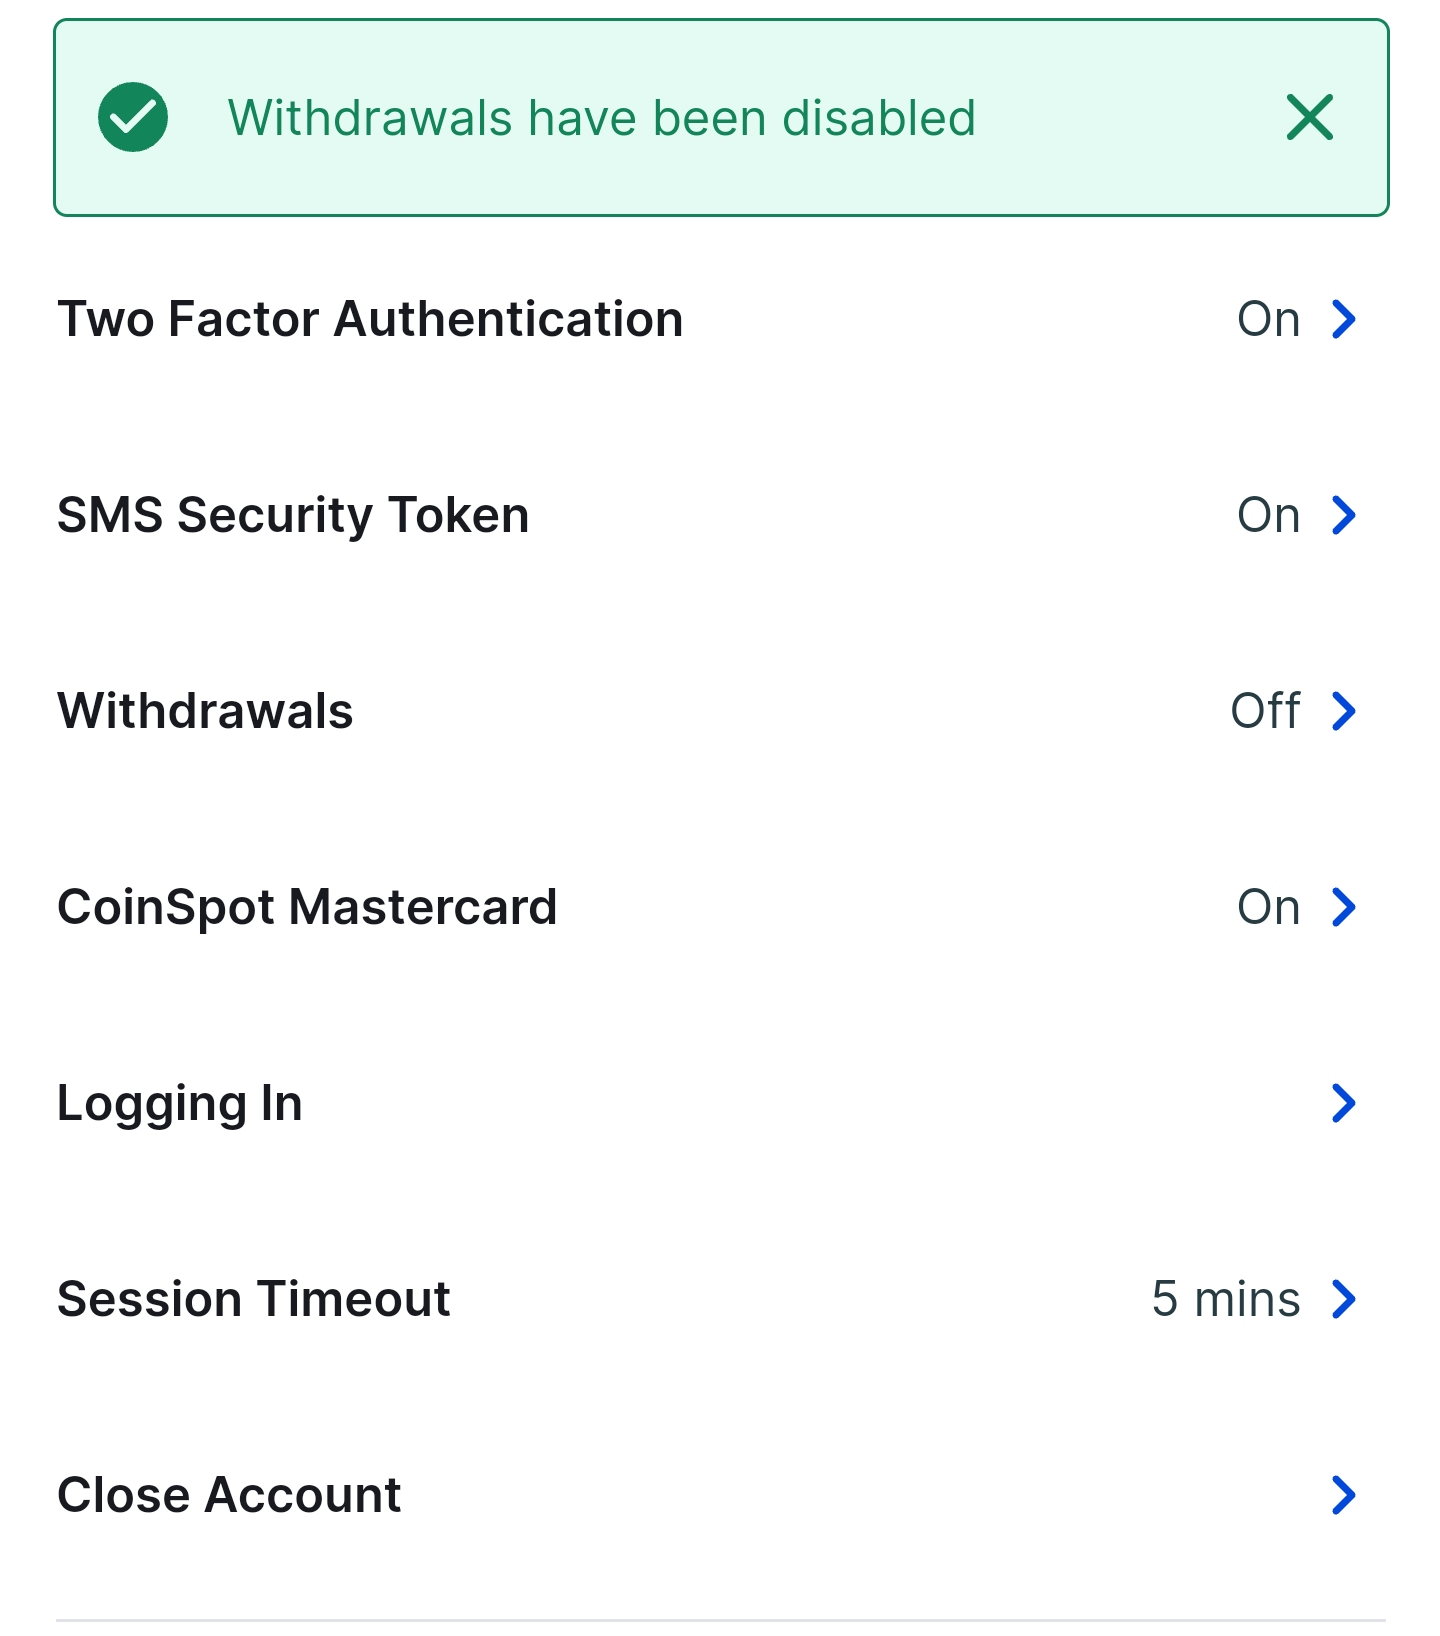 CoinSpot Mobile App - Disabling Withdrawals - Figure 5.png